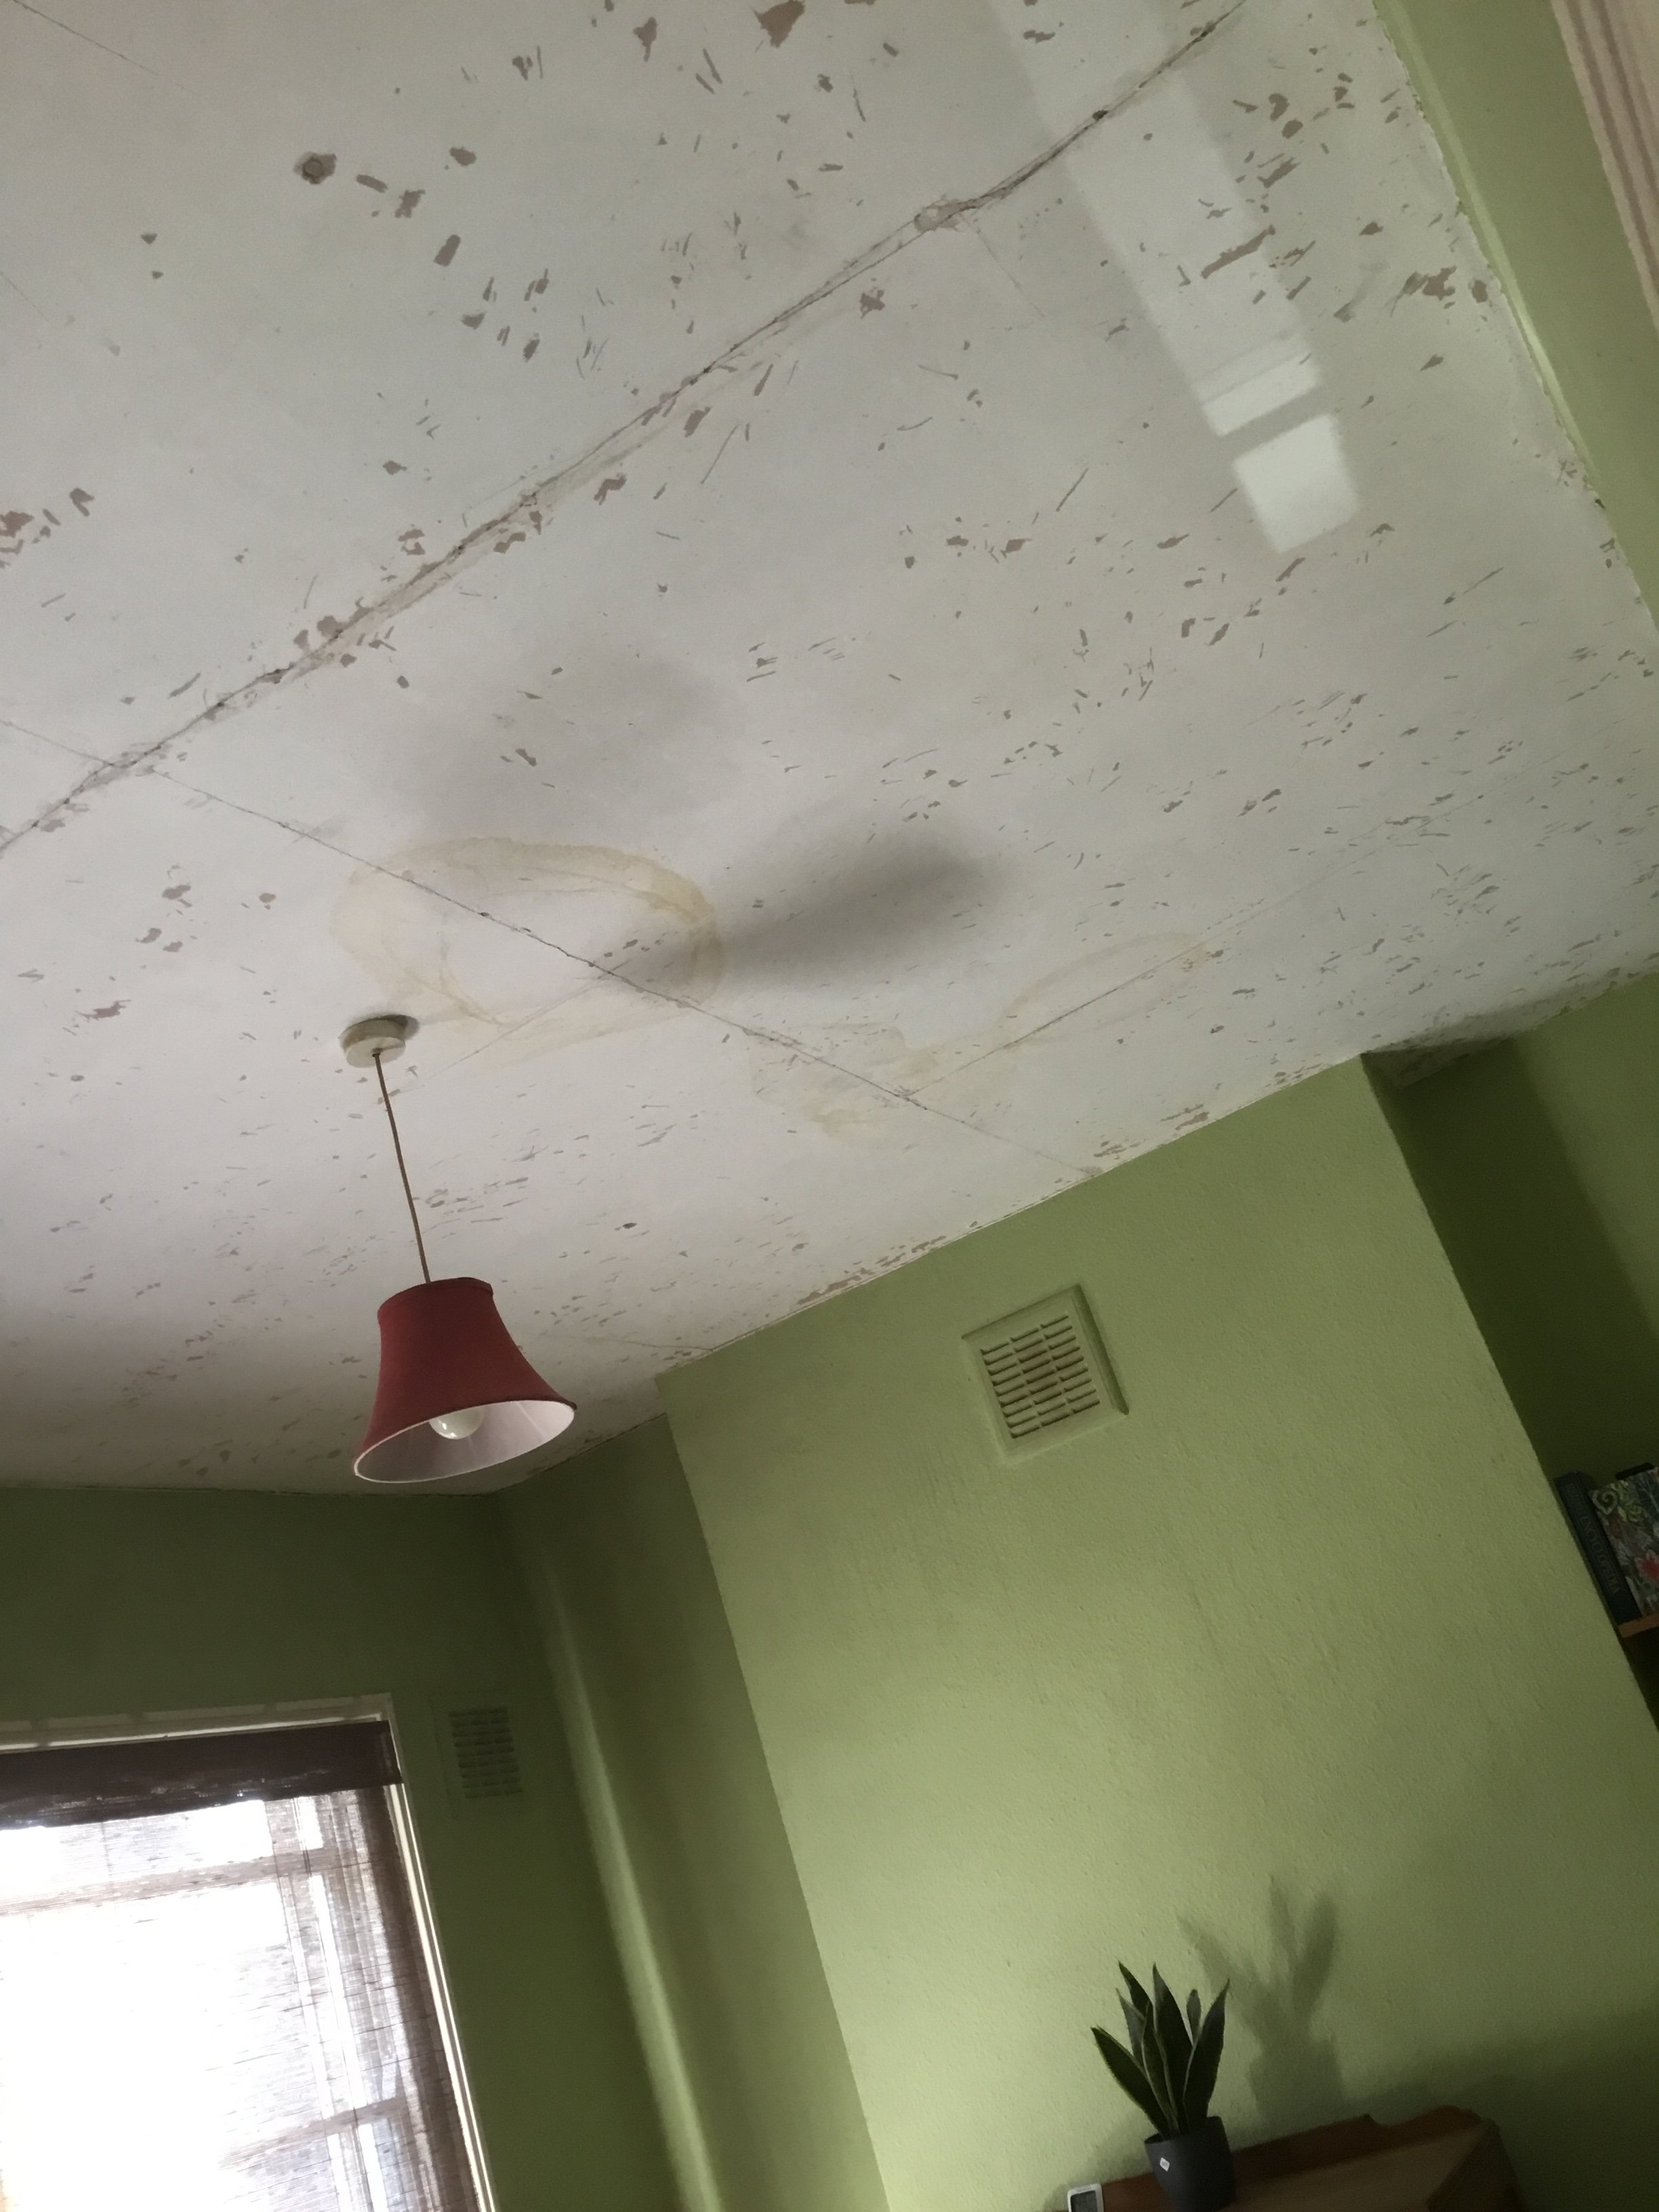 Council house ceiling help needed please